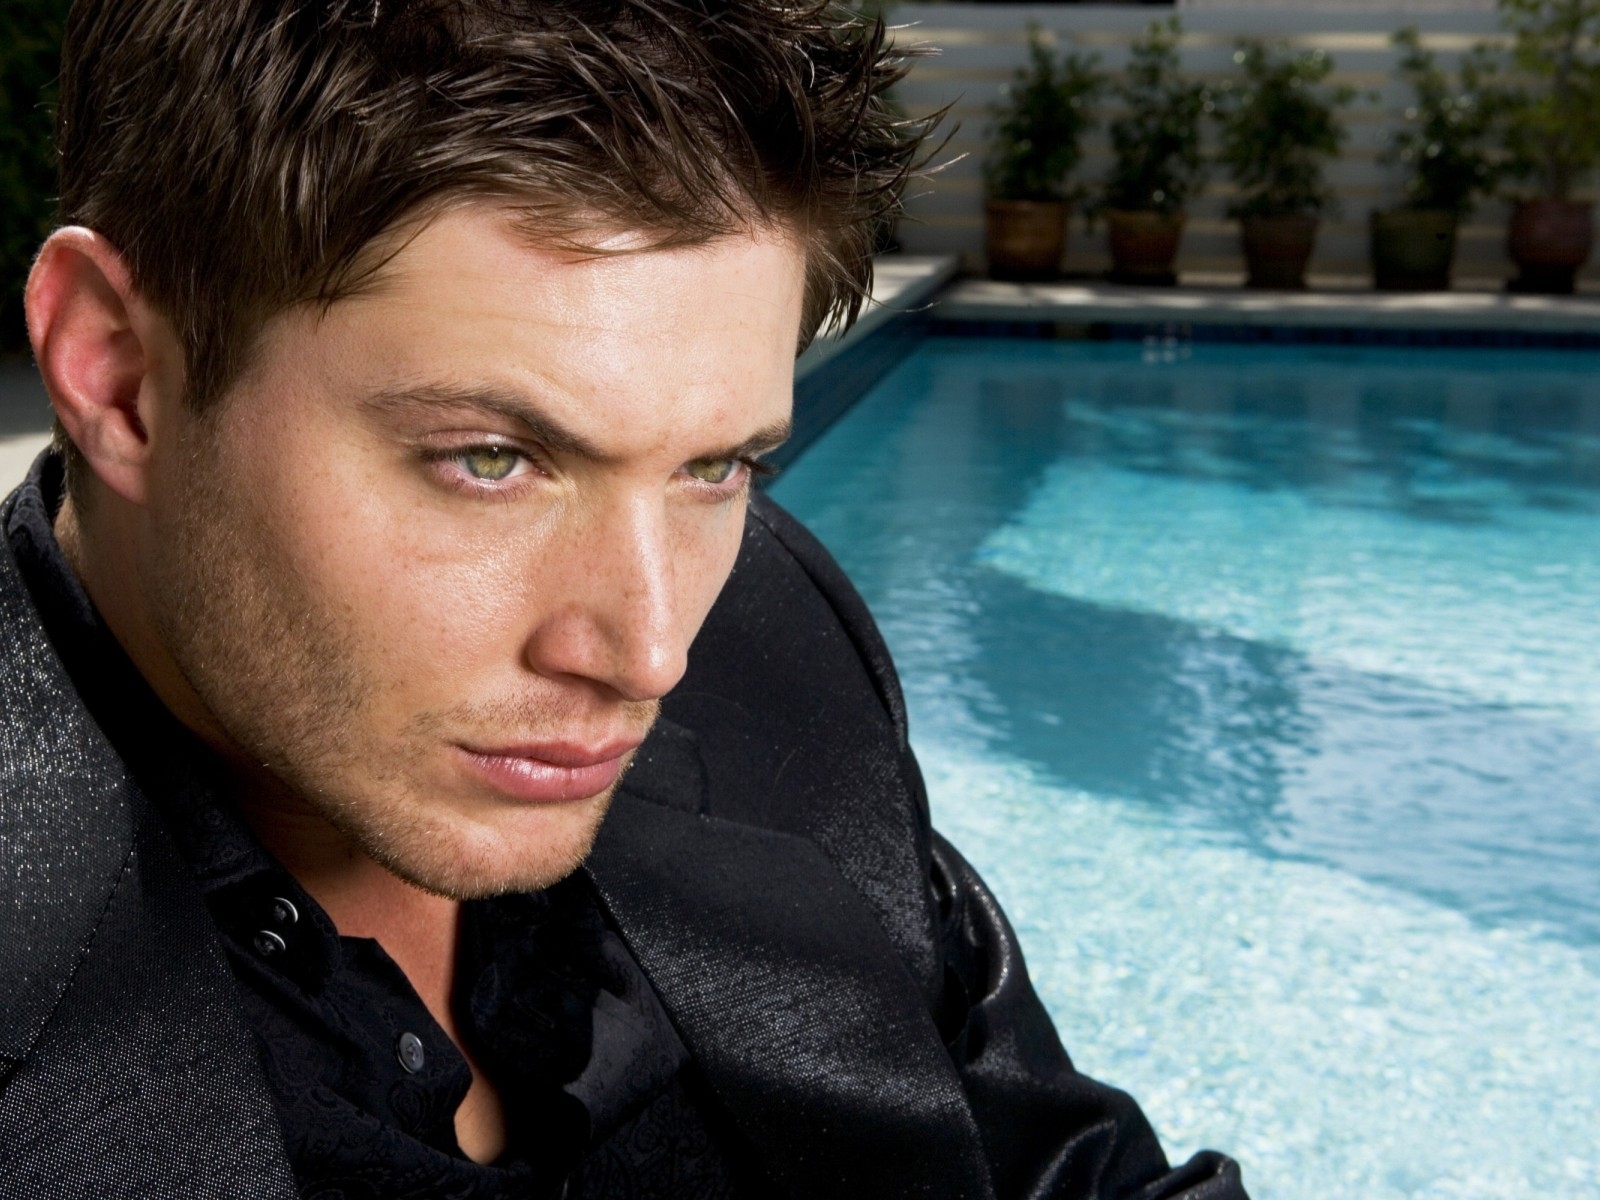 Jensen Ackles Profile Look for 1600 x 1200 resolution